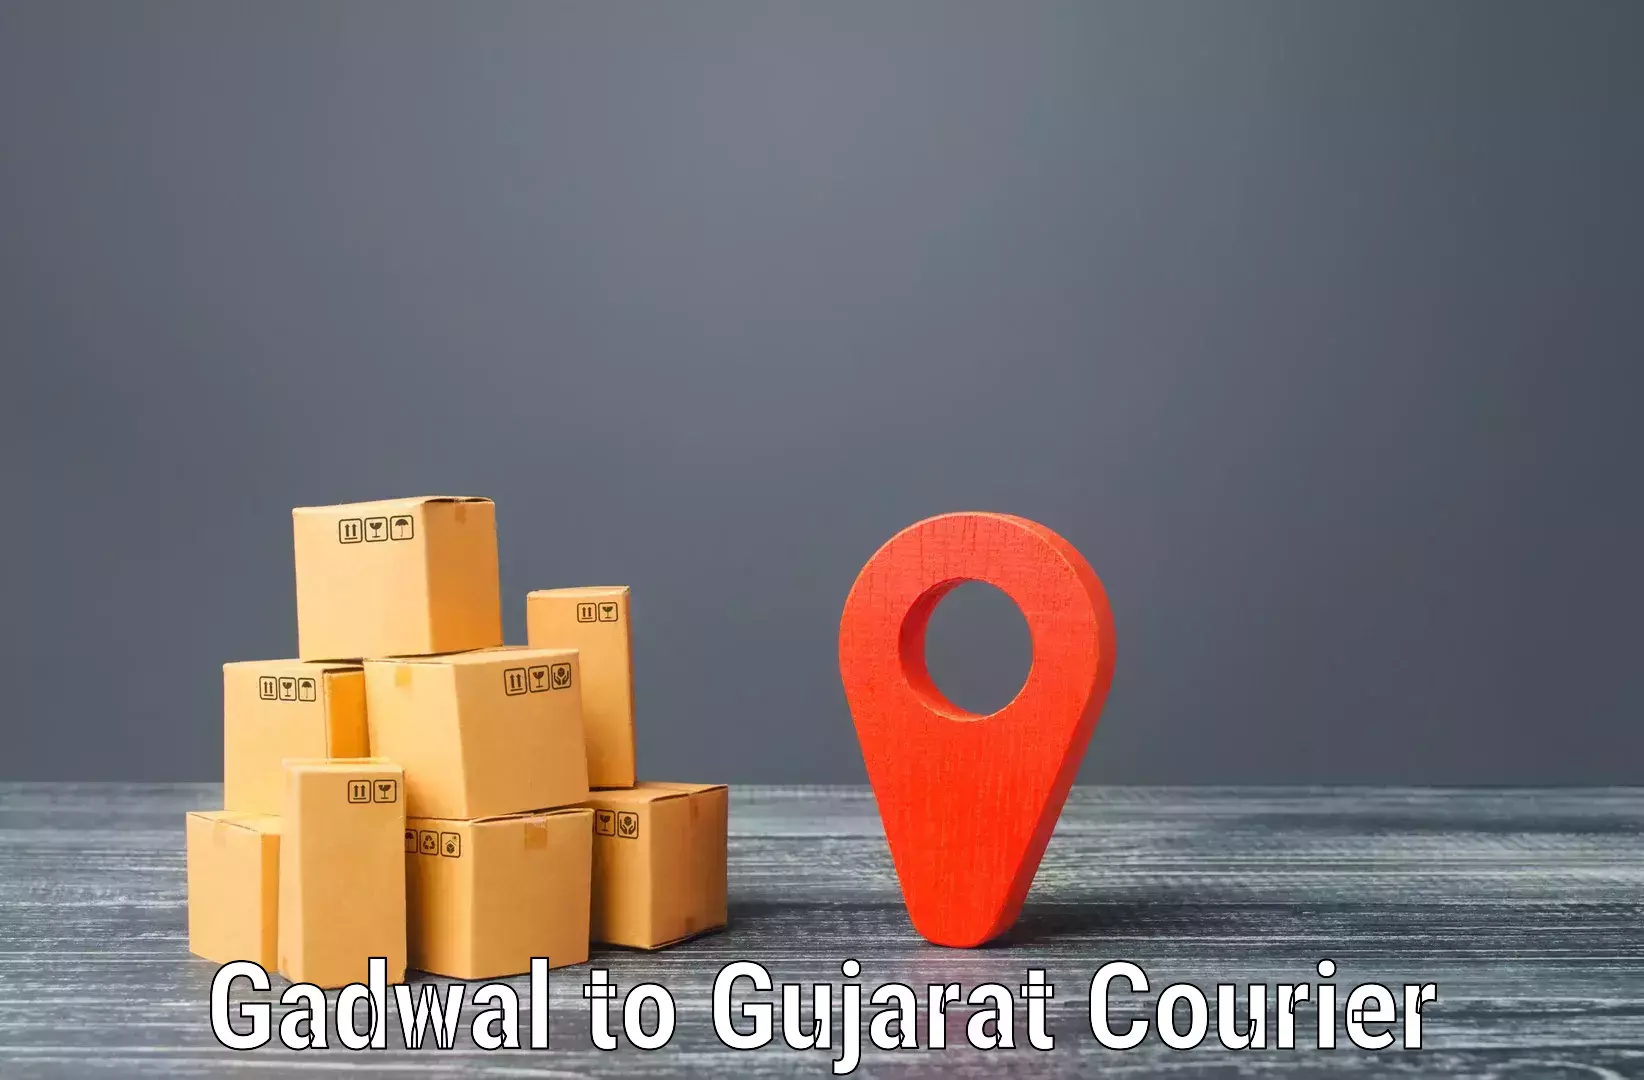 User-friendly courier app Gadwal to Ahmedabad